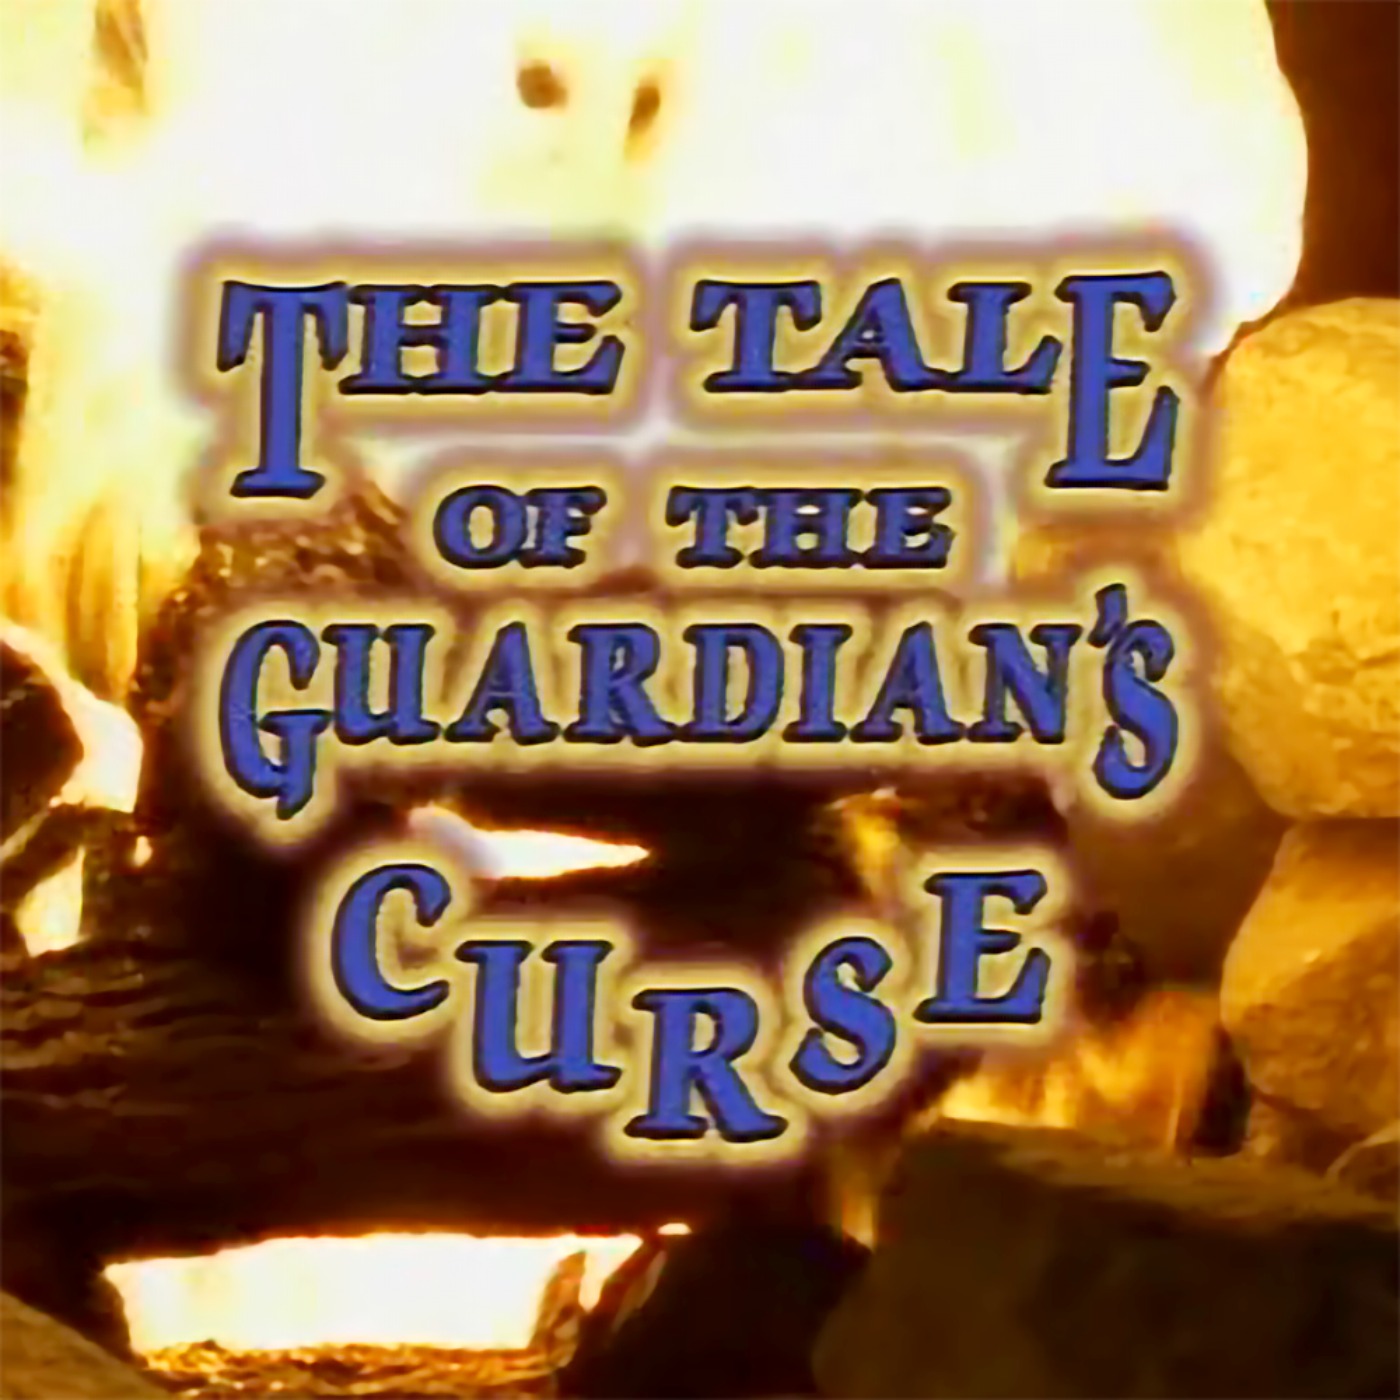 Are You Afraid of the Dark? - The Tale of the Guardian’s Curse